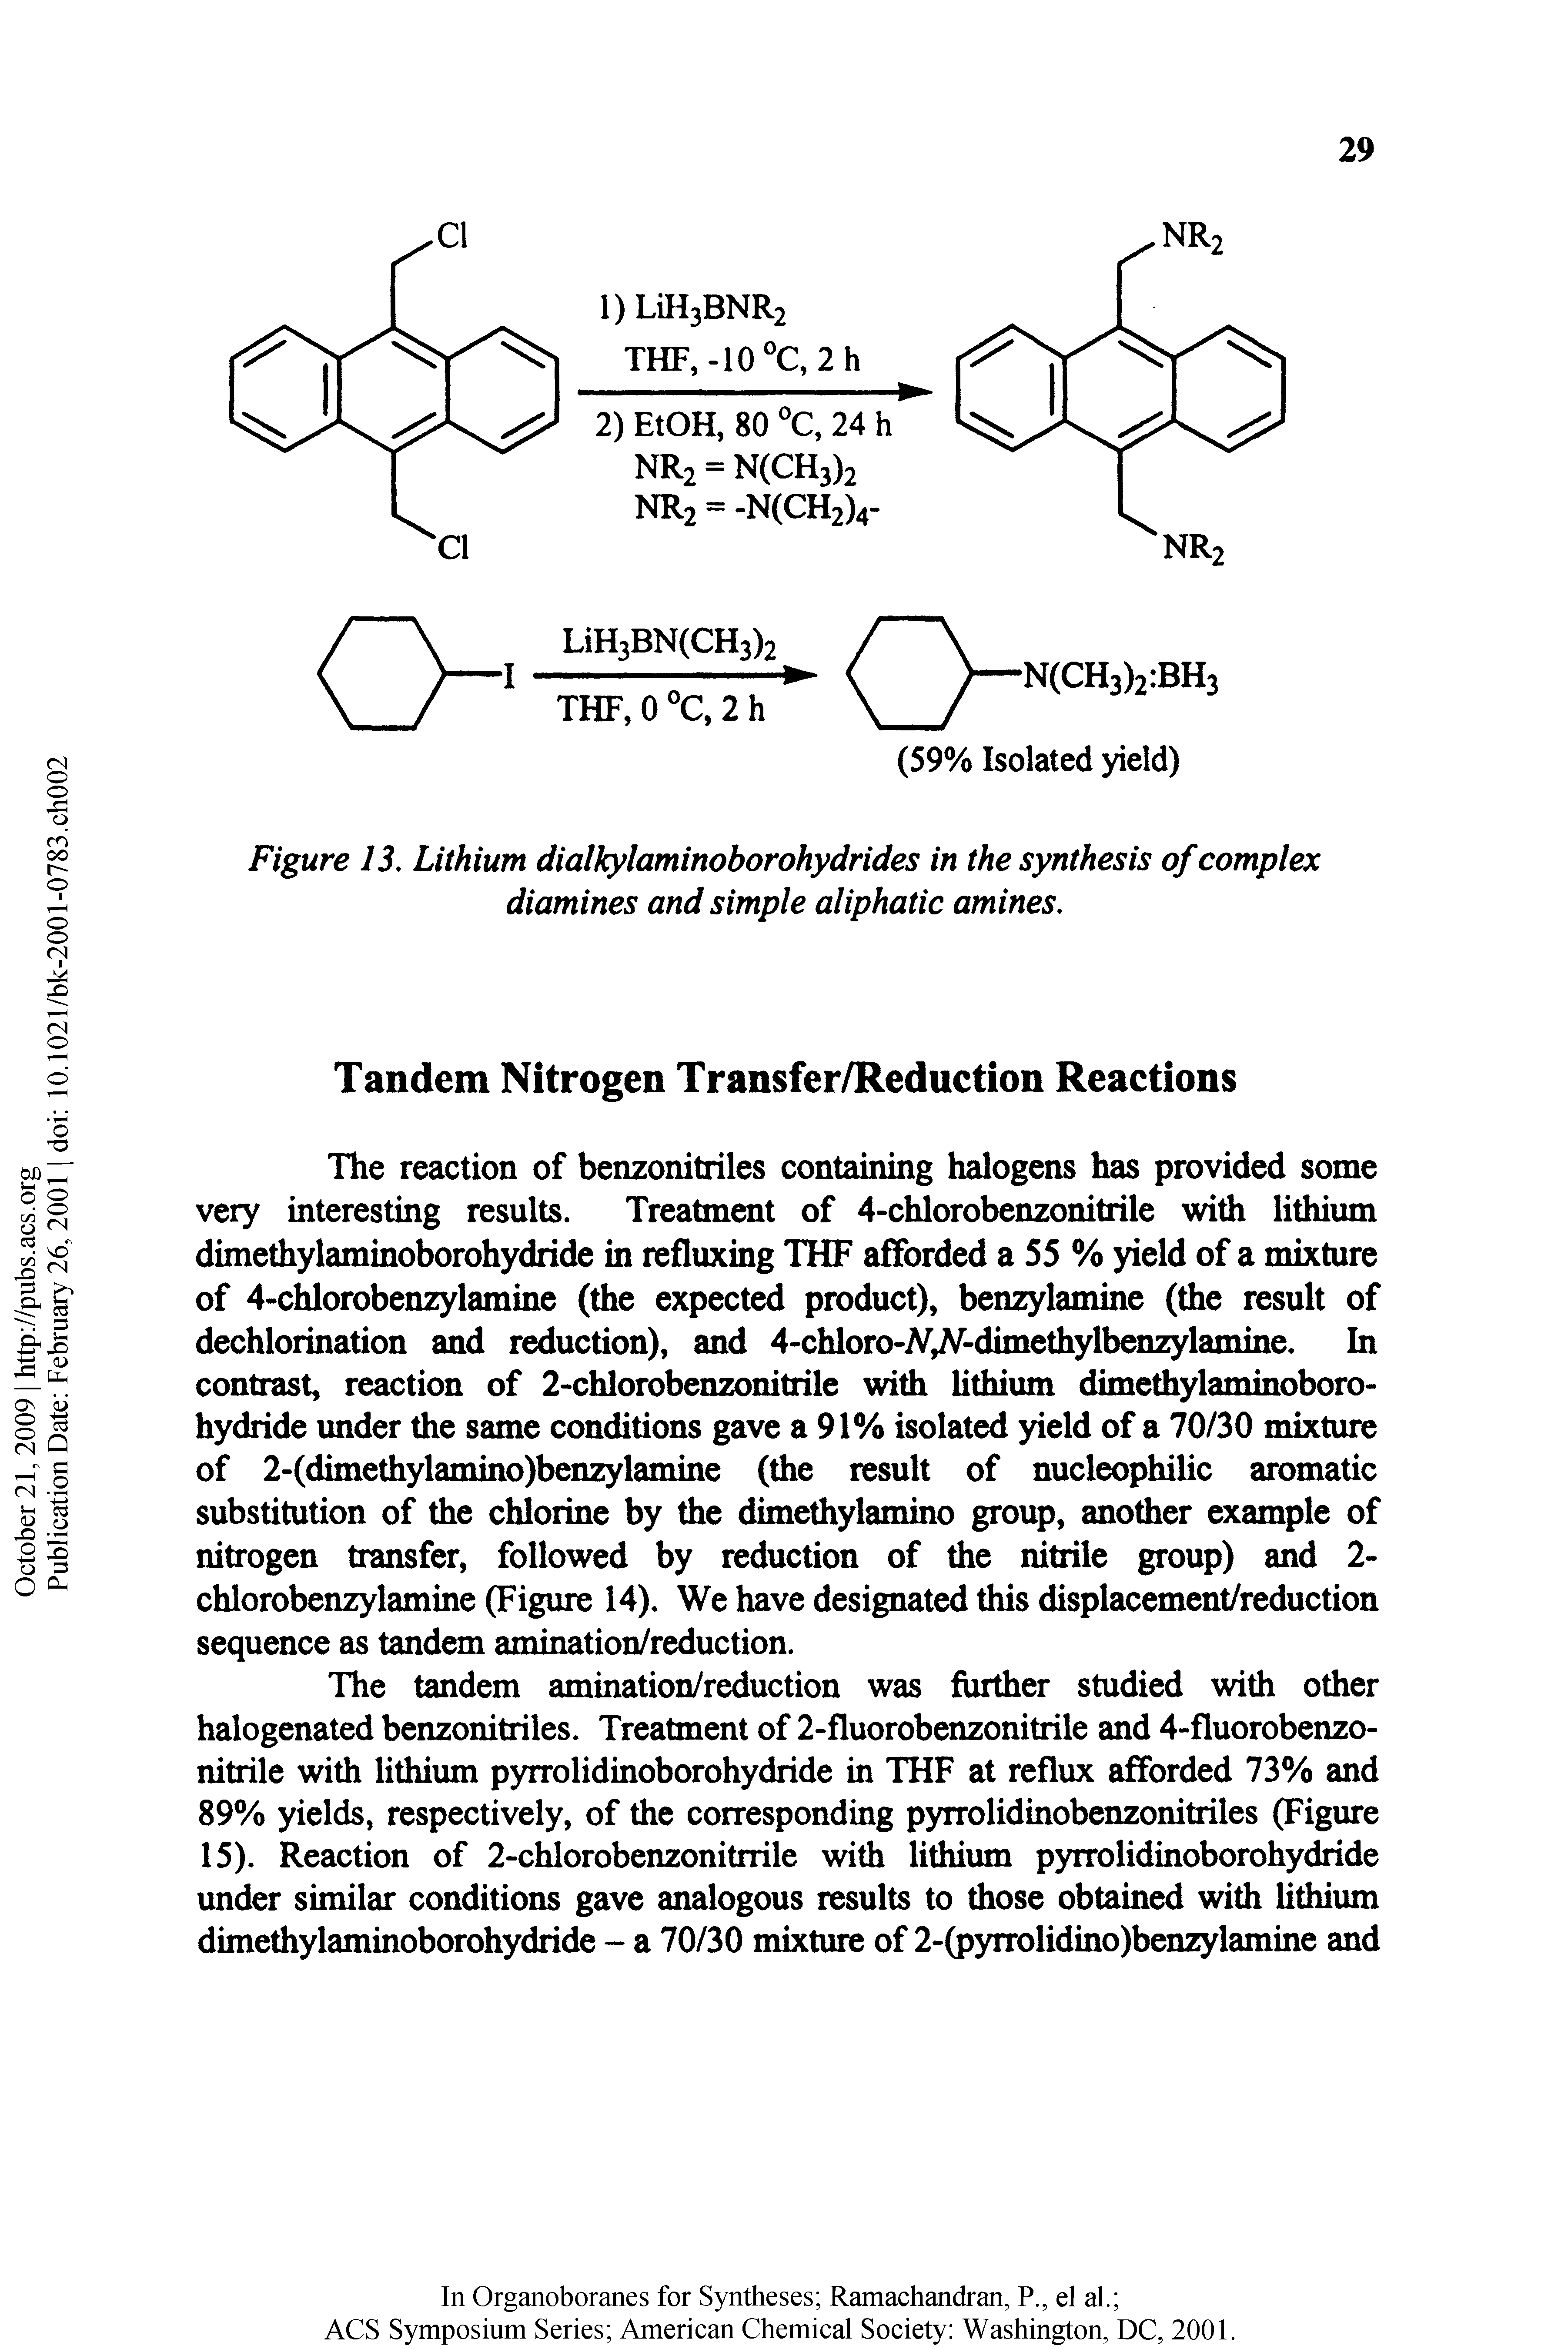 Figure 13, Lithium dialkylaminoborohydrides in the synthesis of complex diamines and simple aliphatic amines.